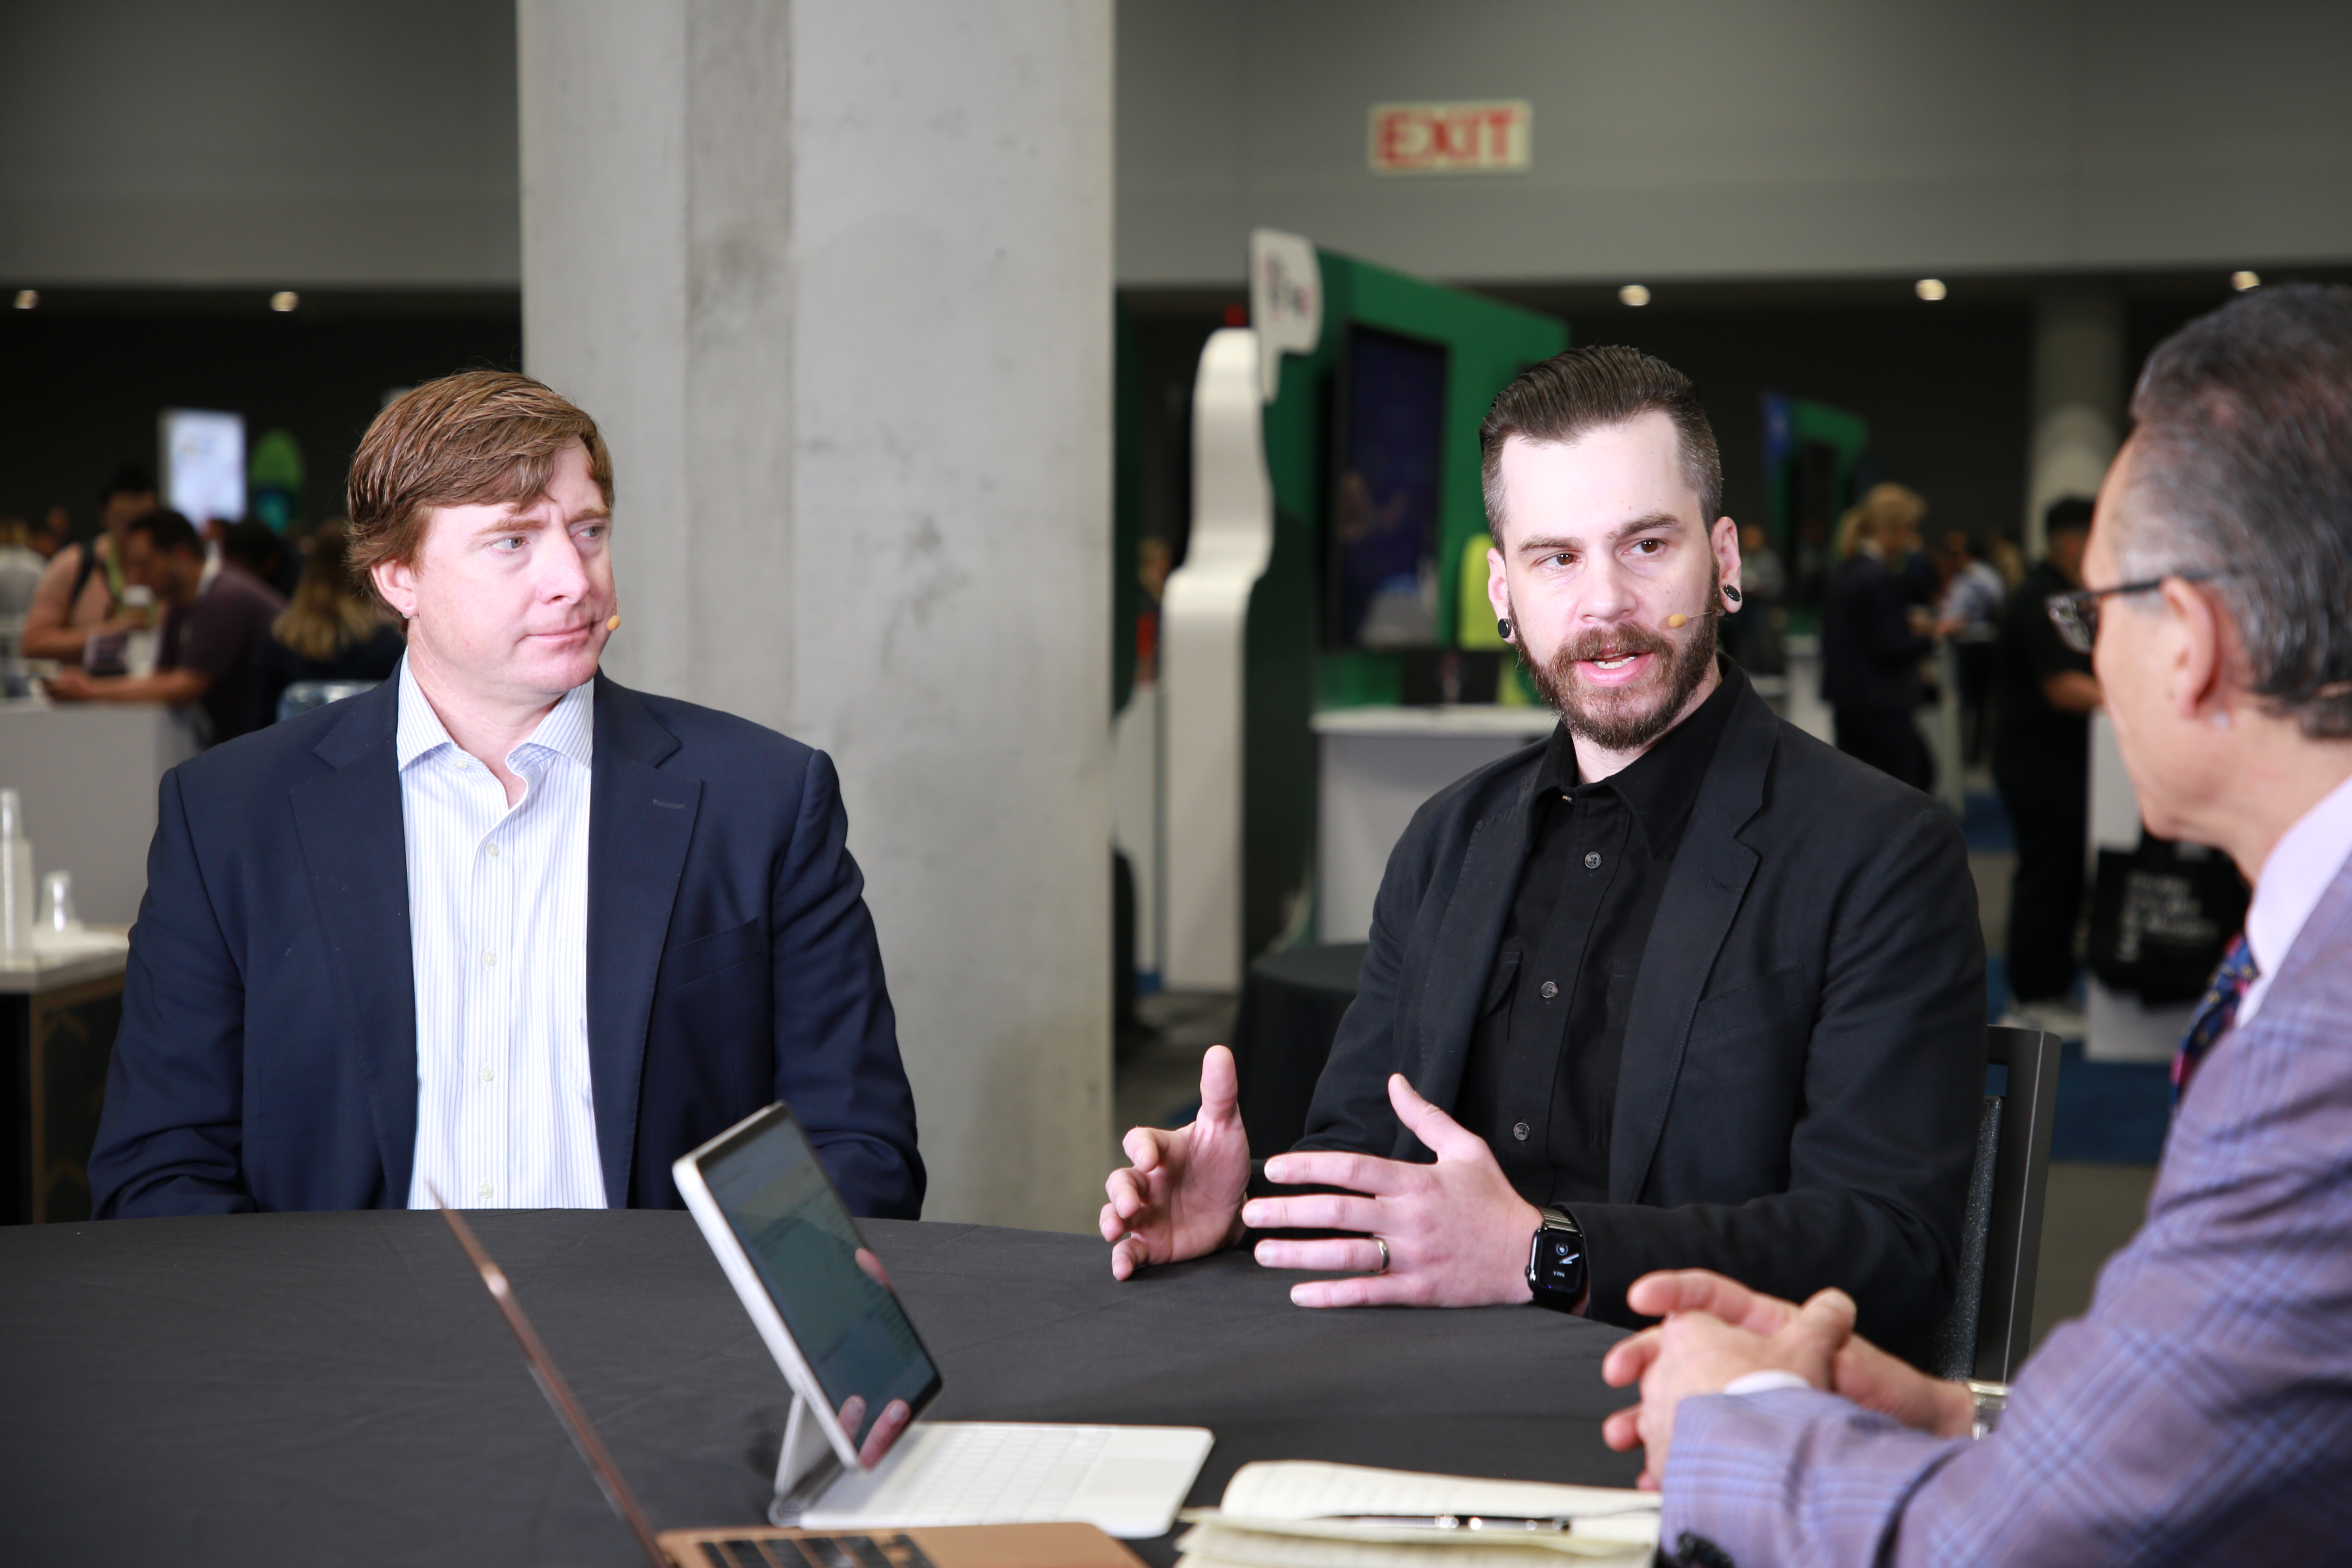 Joe Croney, VP of technology and product development at The Washington Post, and Joey Marburger, director of product strategy and design at Arc XP talk to theCUBE about the evolution of digital media at MongoDB.local NYC 2024.